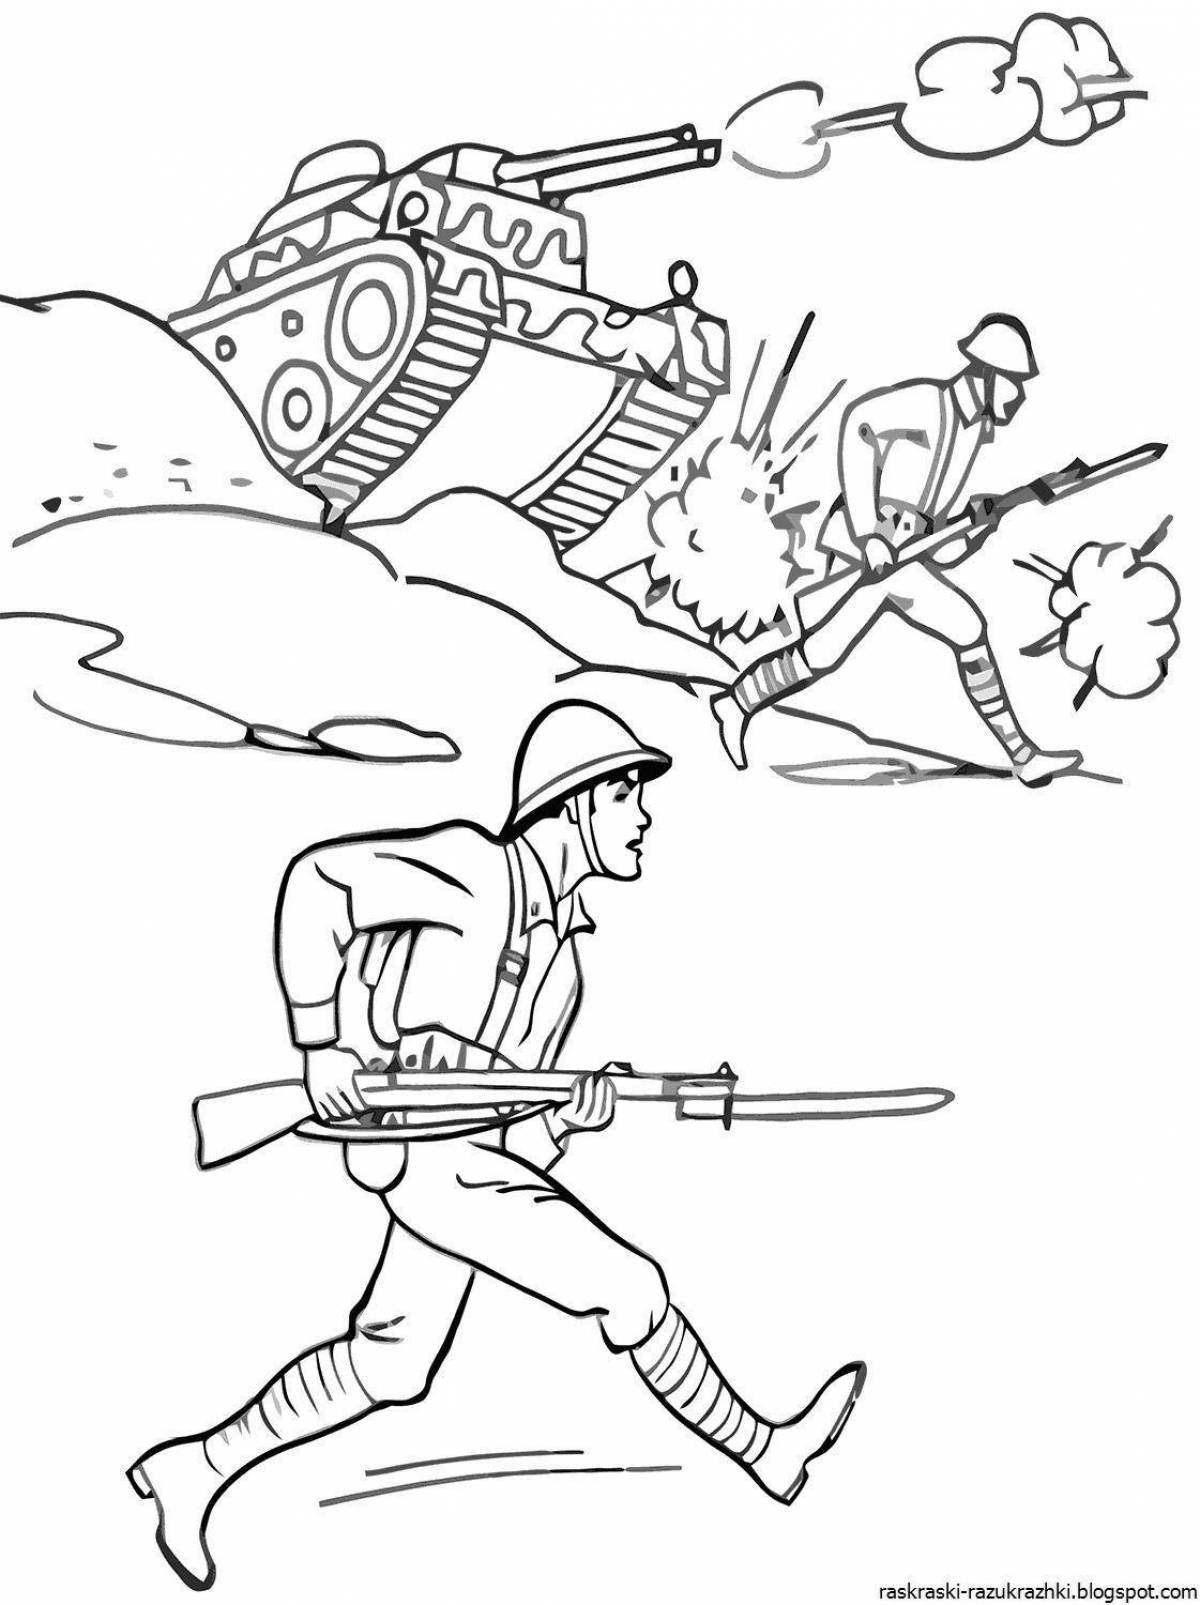 Creative children's military drawing